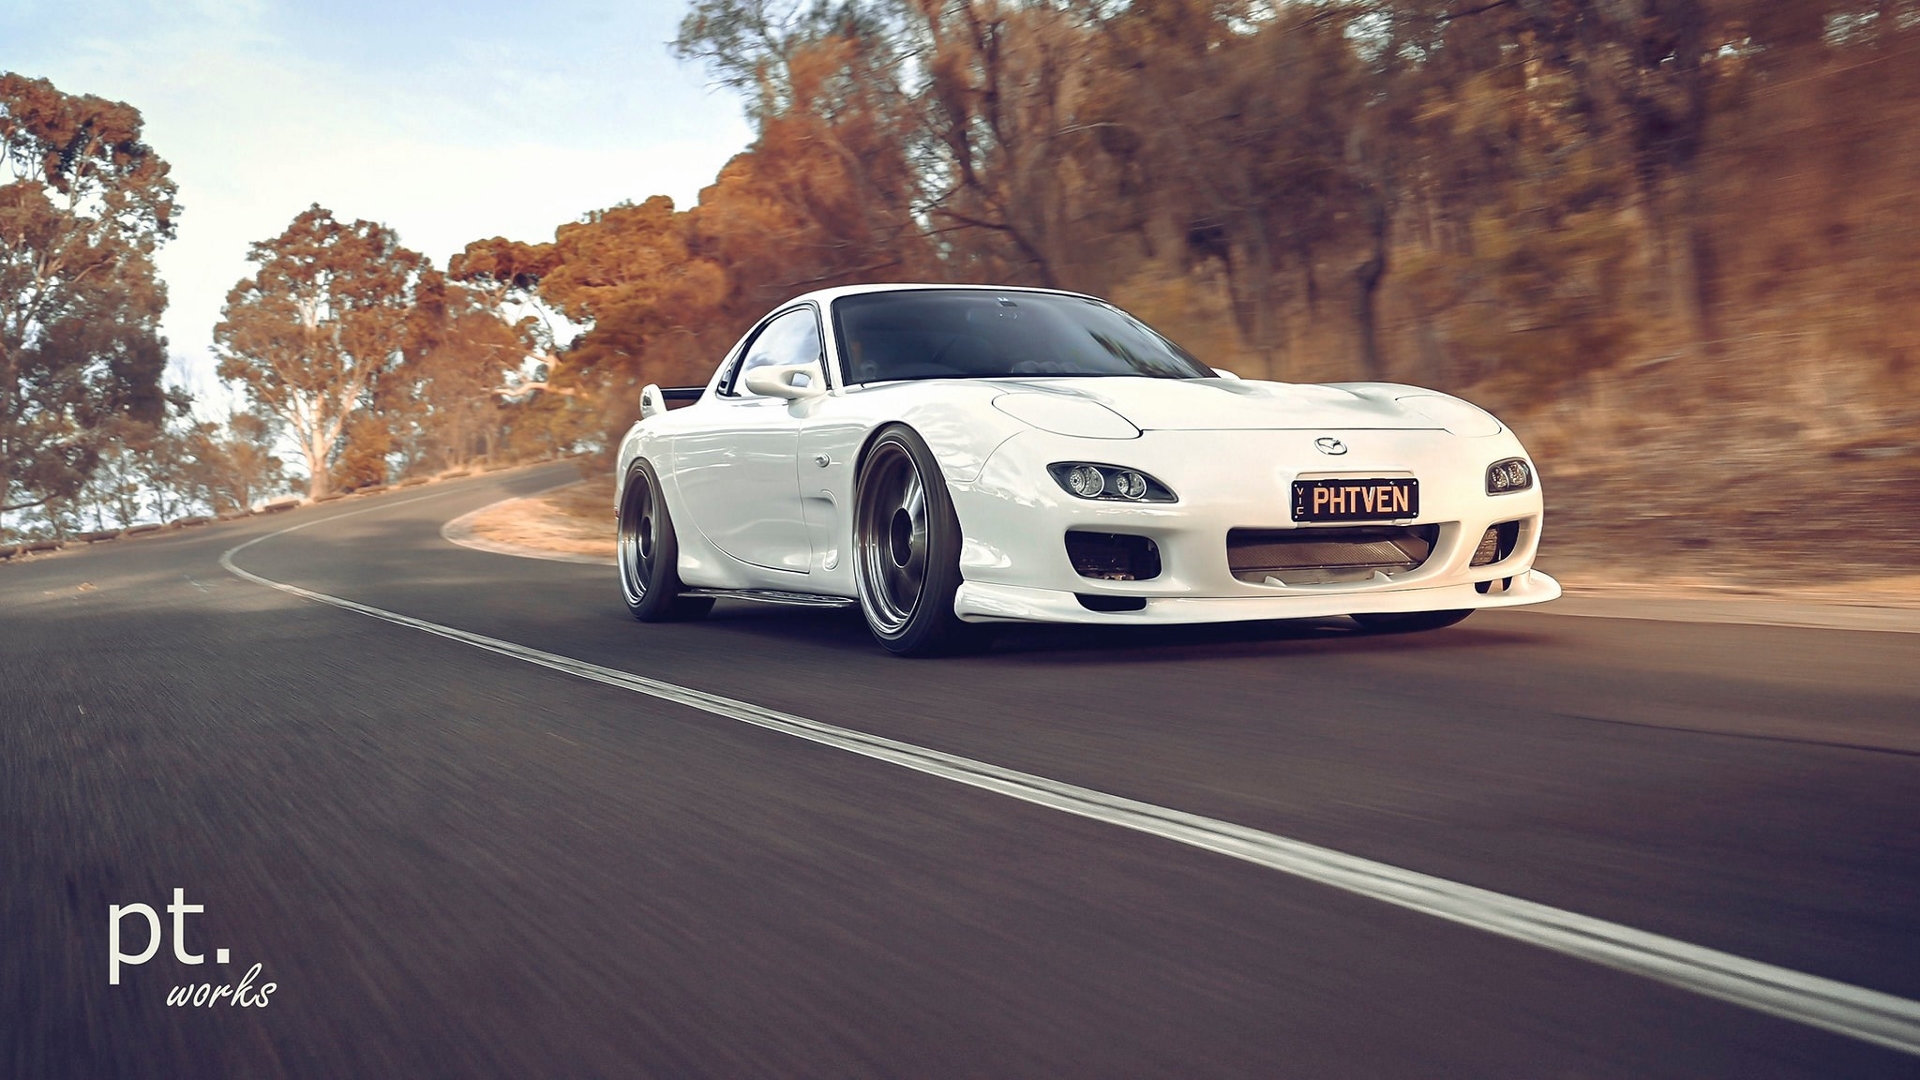 General 1920x1080 Mazda RX-7 Mazda Japanese cars white cars road trees motion blur sports car car vehicle pop-up headlights outdoors PT works